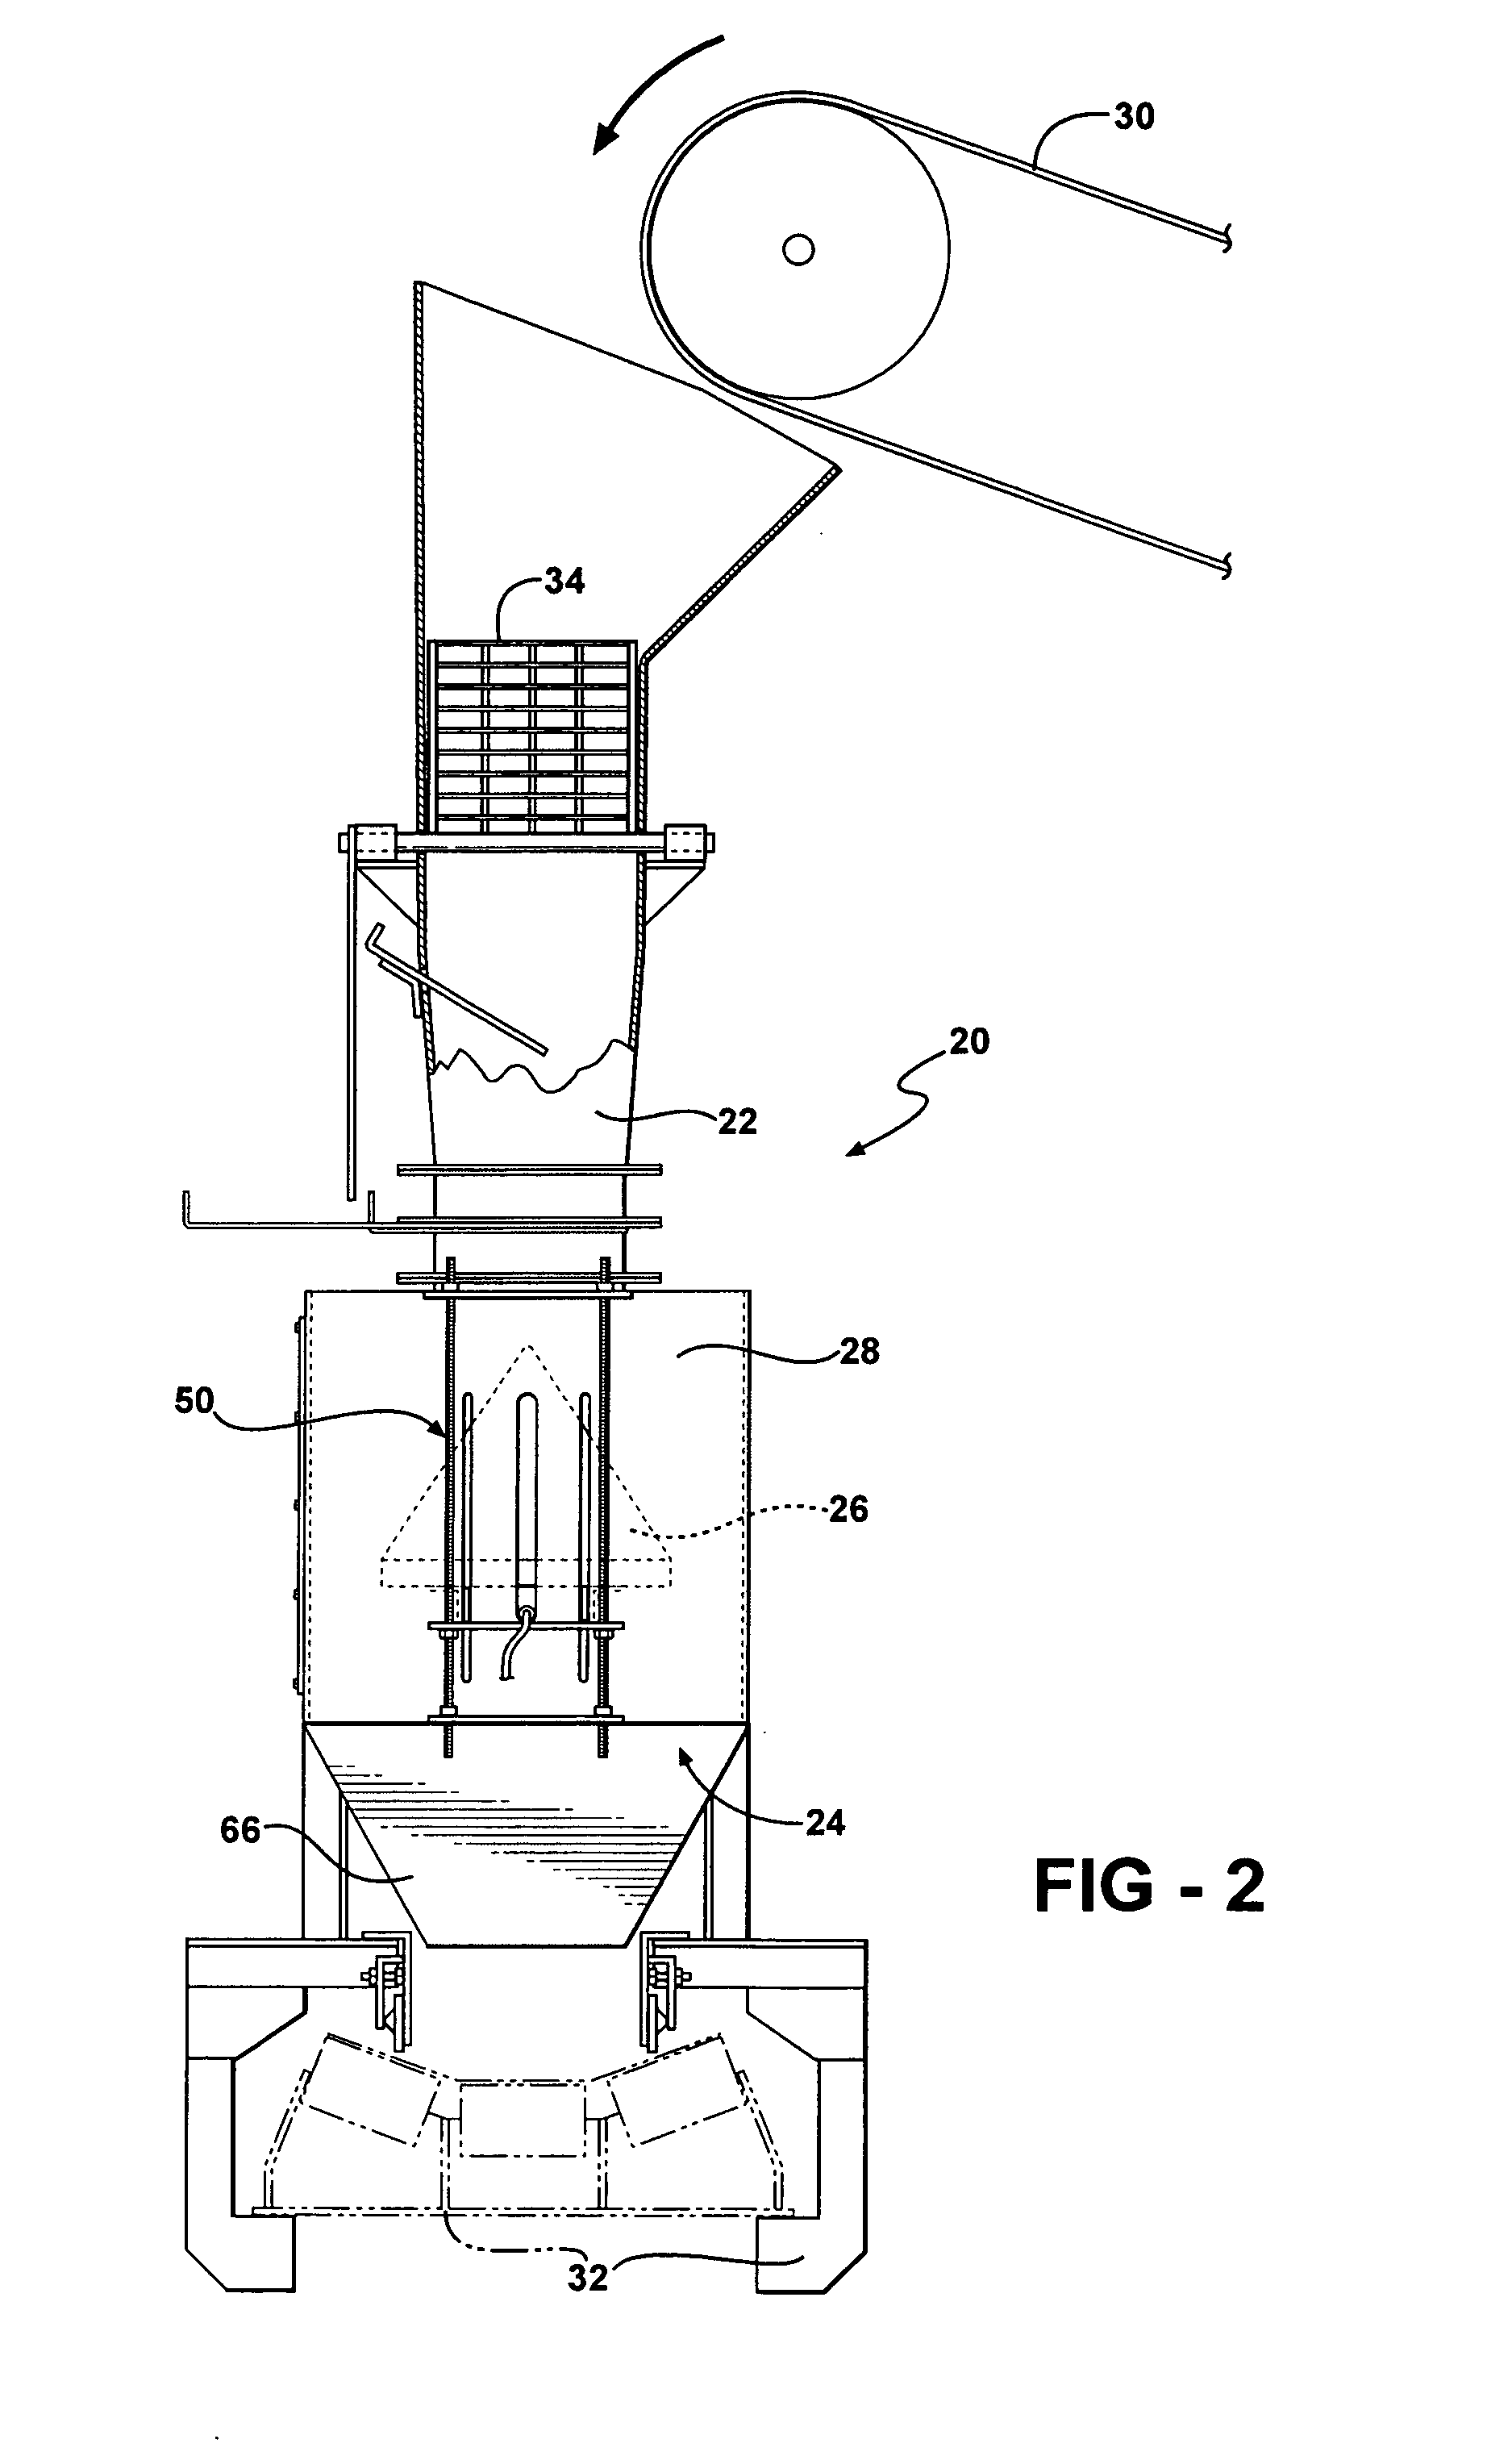 Apparatus for treating particles utilizing a flow control device